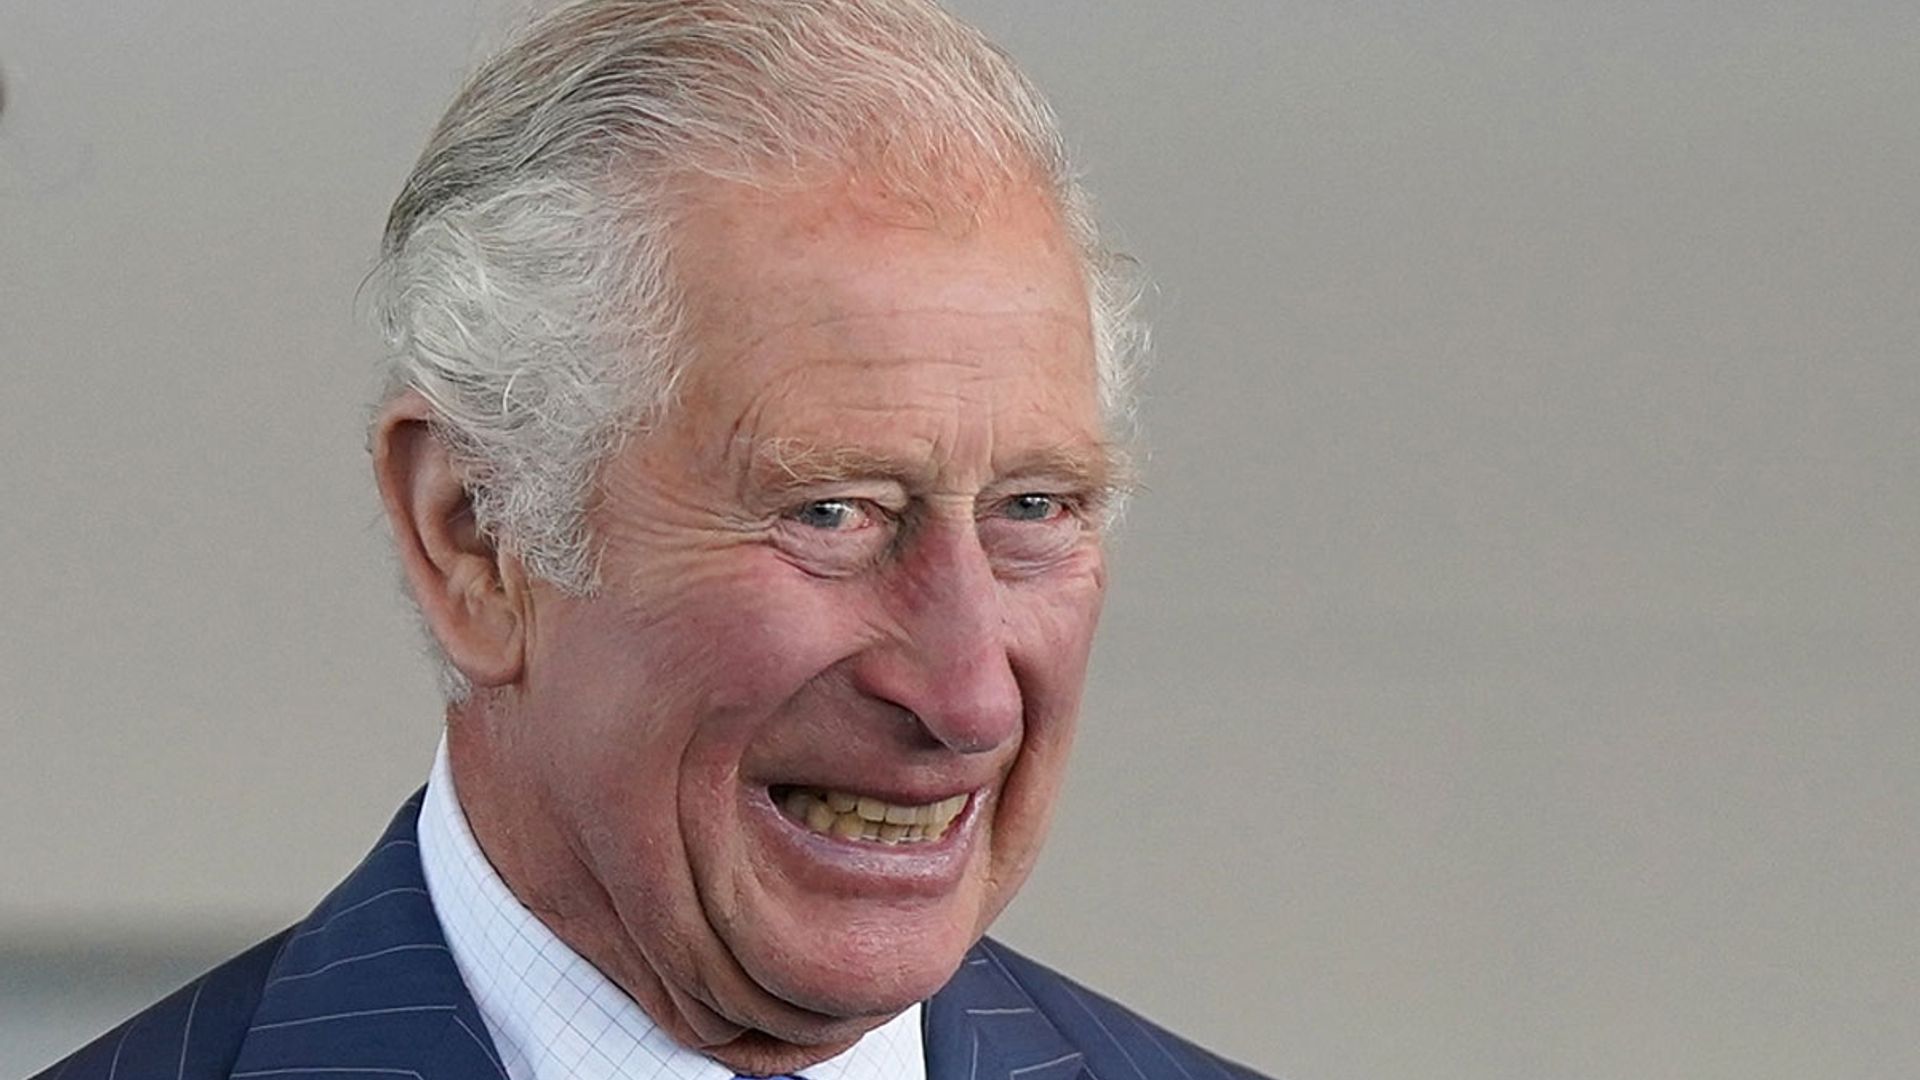 Prince Charles shares unexpected health secret ahead of busy Jubilee